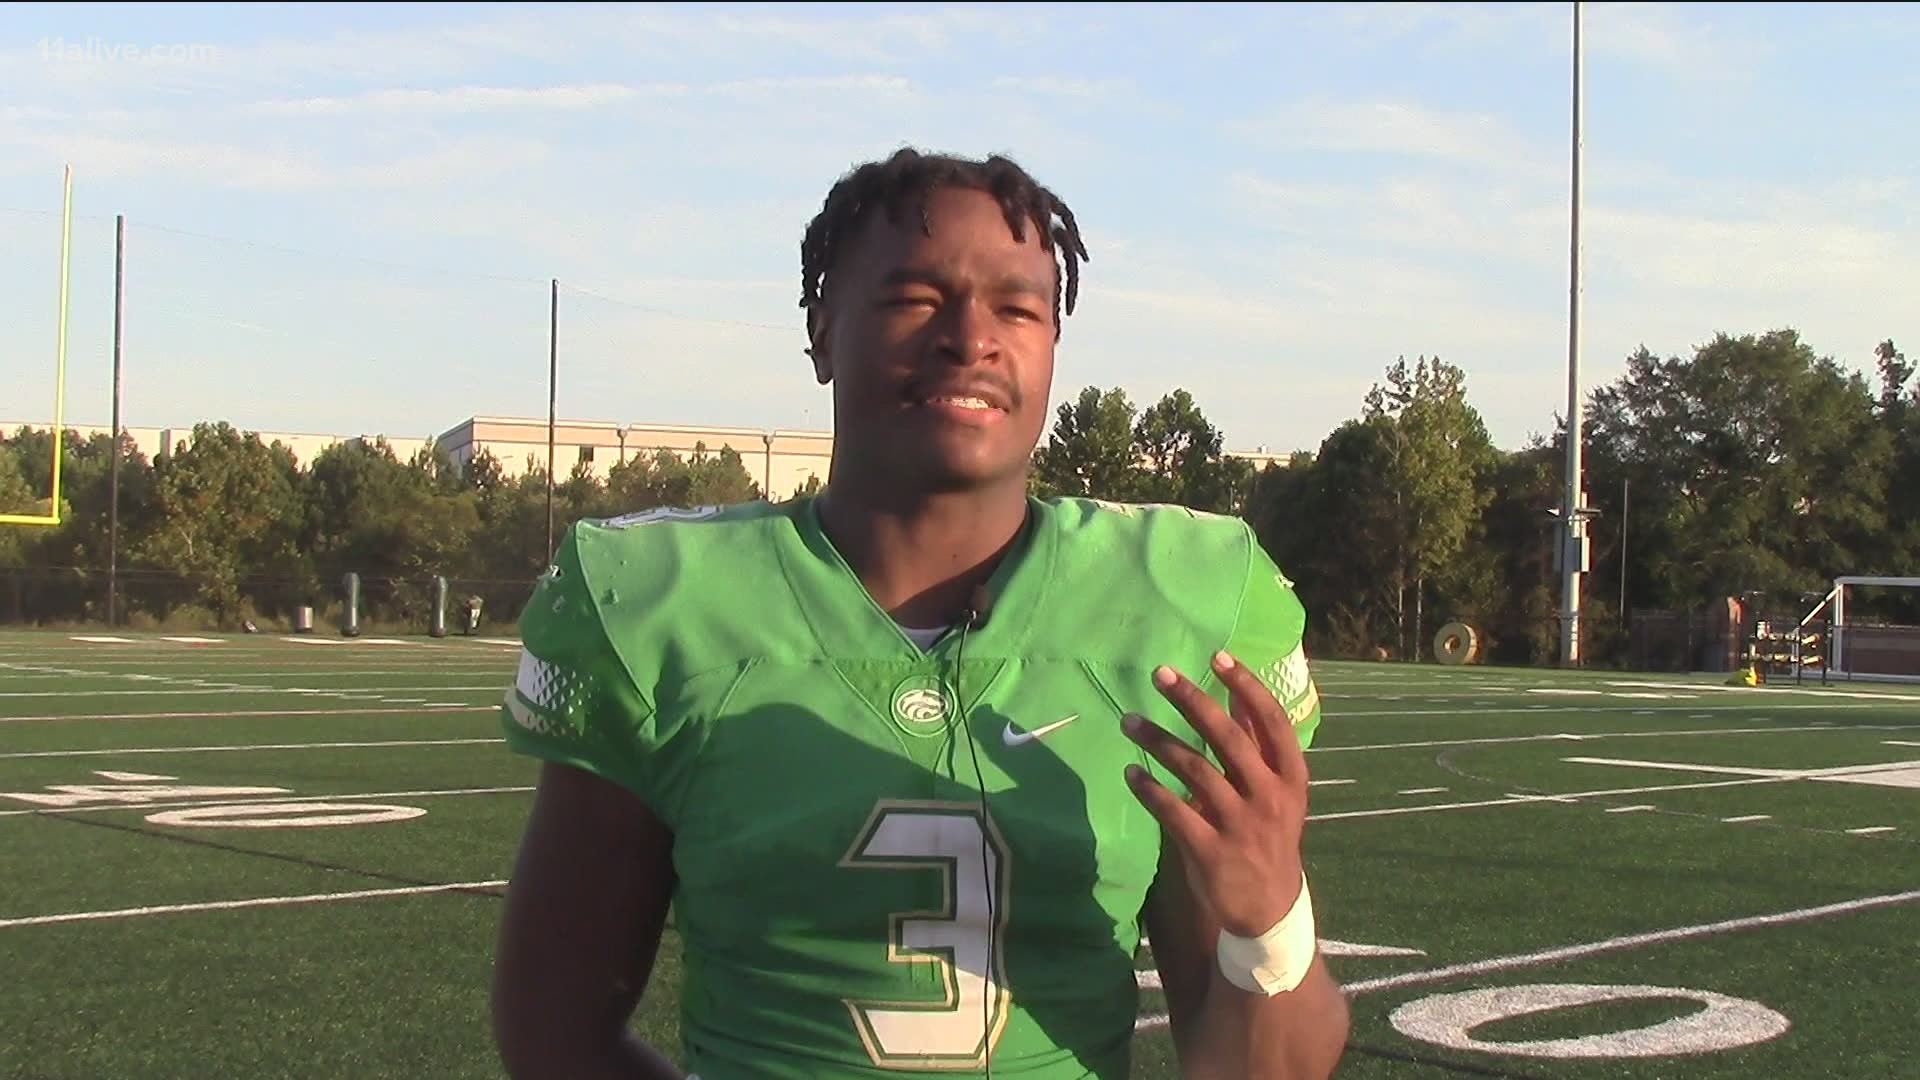 The junior linebacker plays a hybrid role at Buford and has already received offers including one from UGA way back during his freshman year.